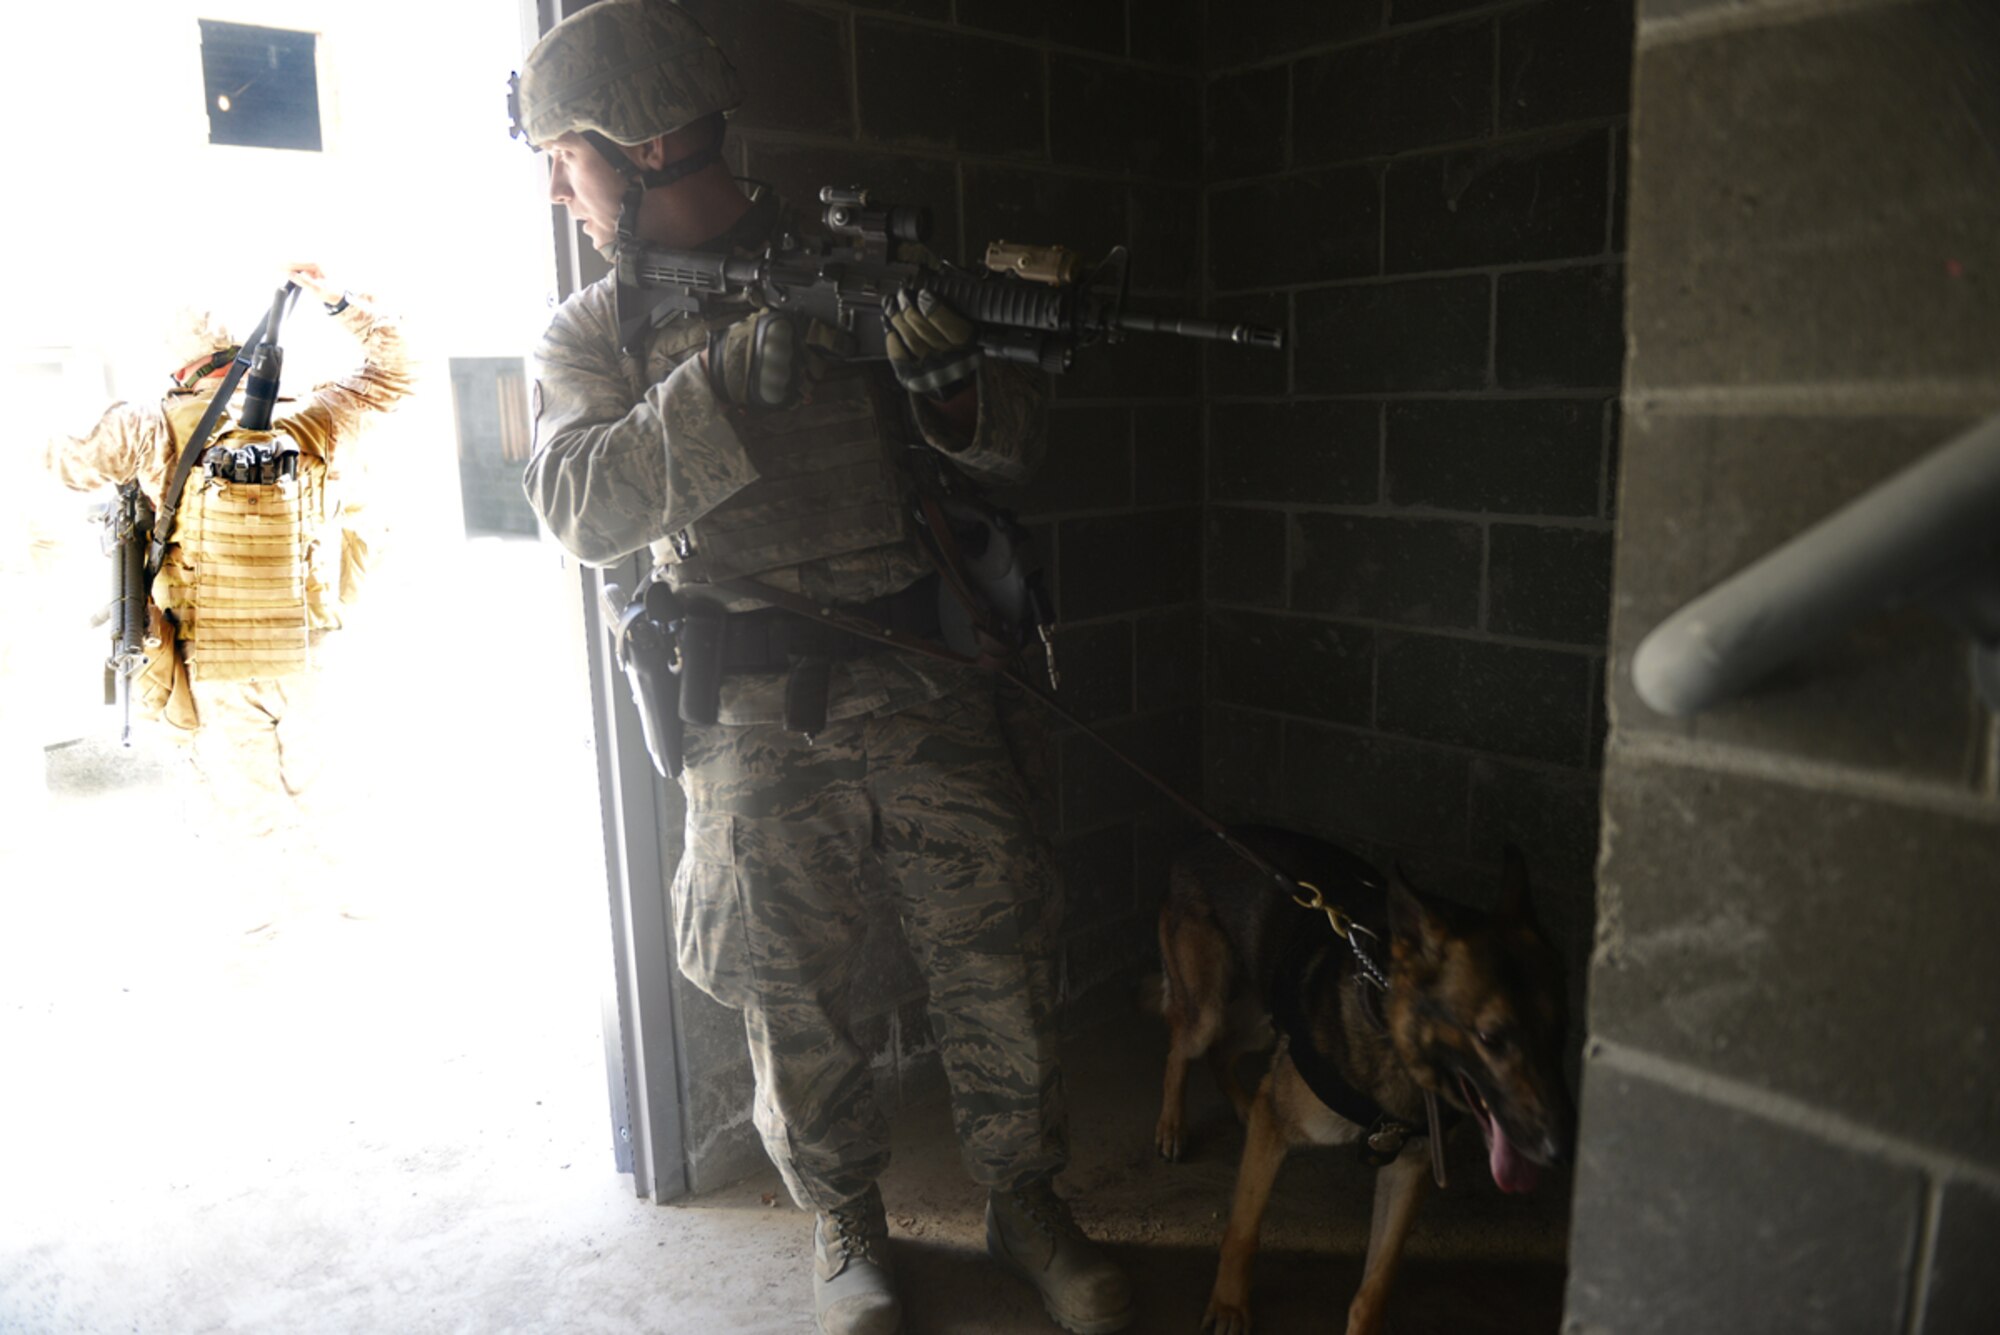 JOINT BASE ELMENDORF-RICHARDSON, Alaska -- Air Force Staff Sgt. Gregory Maata, 673d Security Forces Squadron military dog handler and Military Working Dog Sandor secure a building entrance during the Marine military police training at the Baumeister training ground June 24. The training was done to prepare them for their migration into the military police field. The training spanned 14 days and reviewed concepts such as rules of engagement and use of force when in a foreign field. (U.S. Air Force photo/Airman 1st Class Ty-Rico Lea)